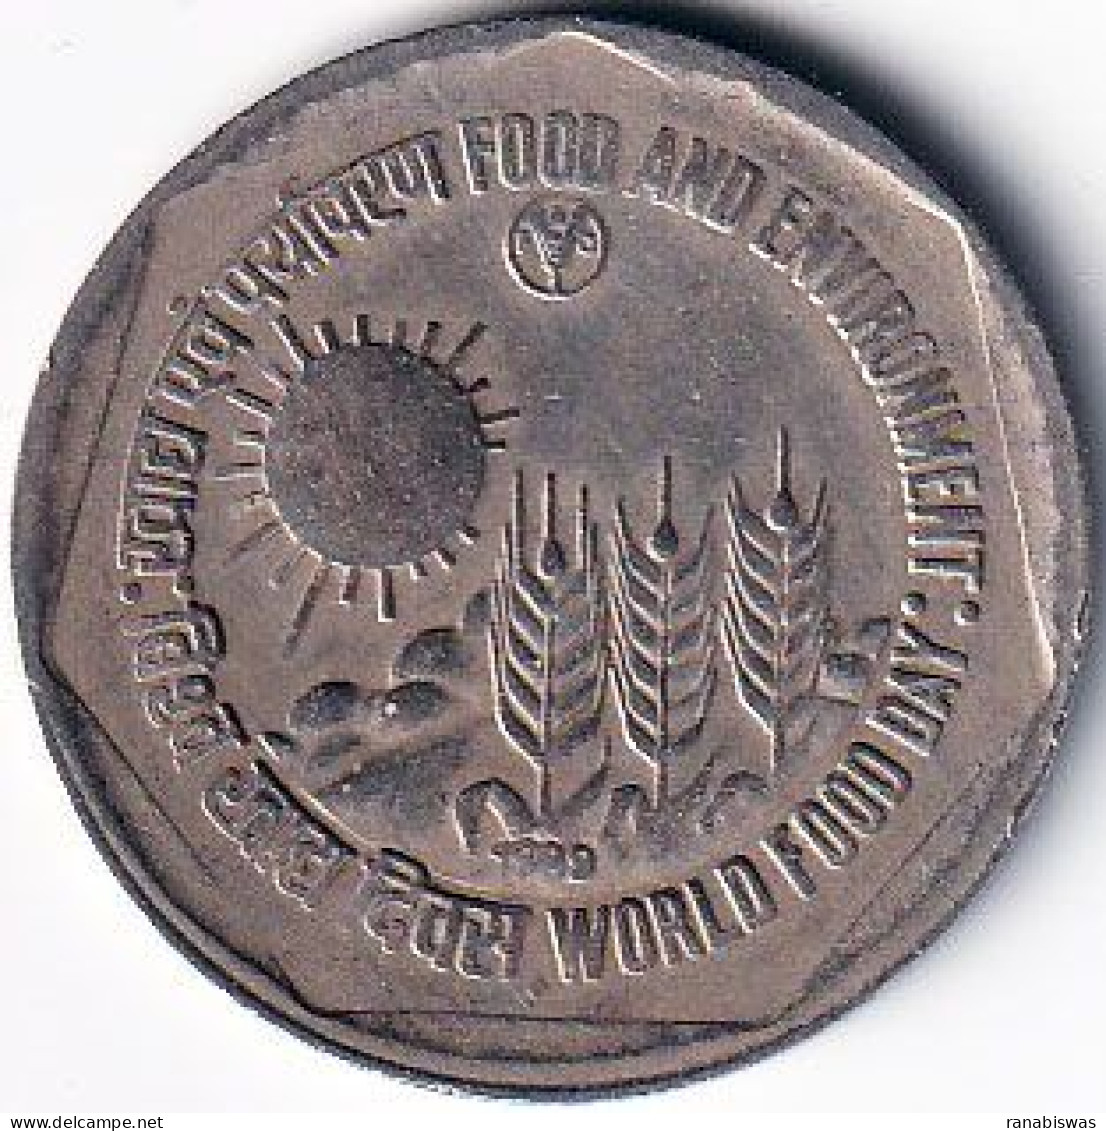 INDIA COIN LOT 33, 1 RUPEE 1989, FOOD & ENVIRONMENT, FAO, BOMBAY MINT, XF, SCARE - Indien